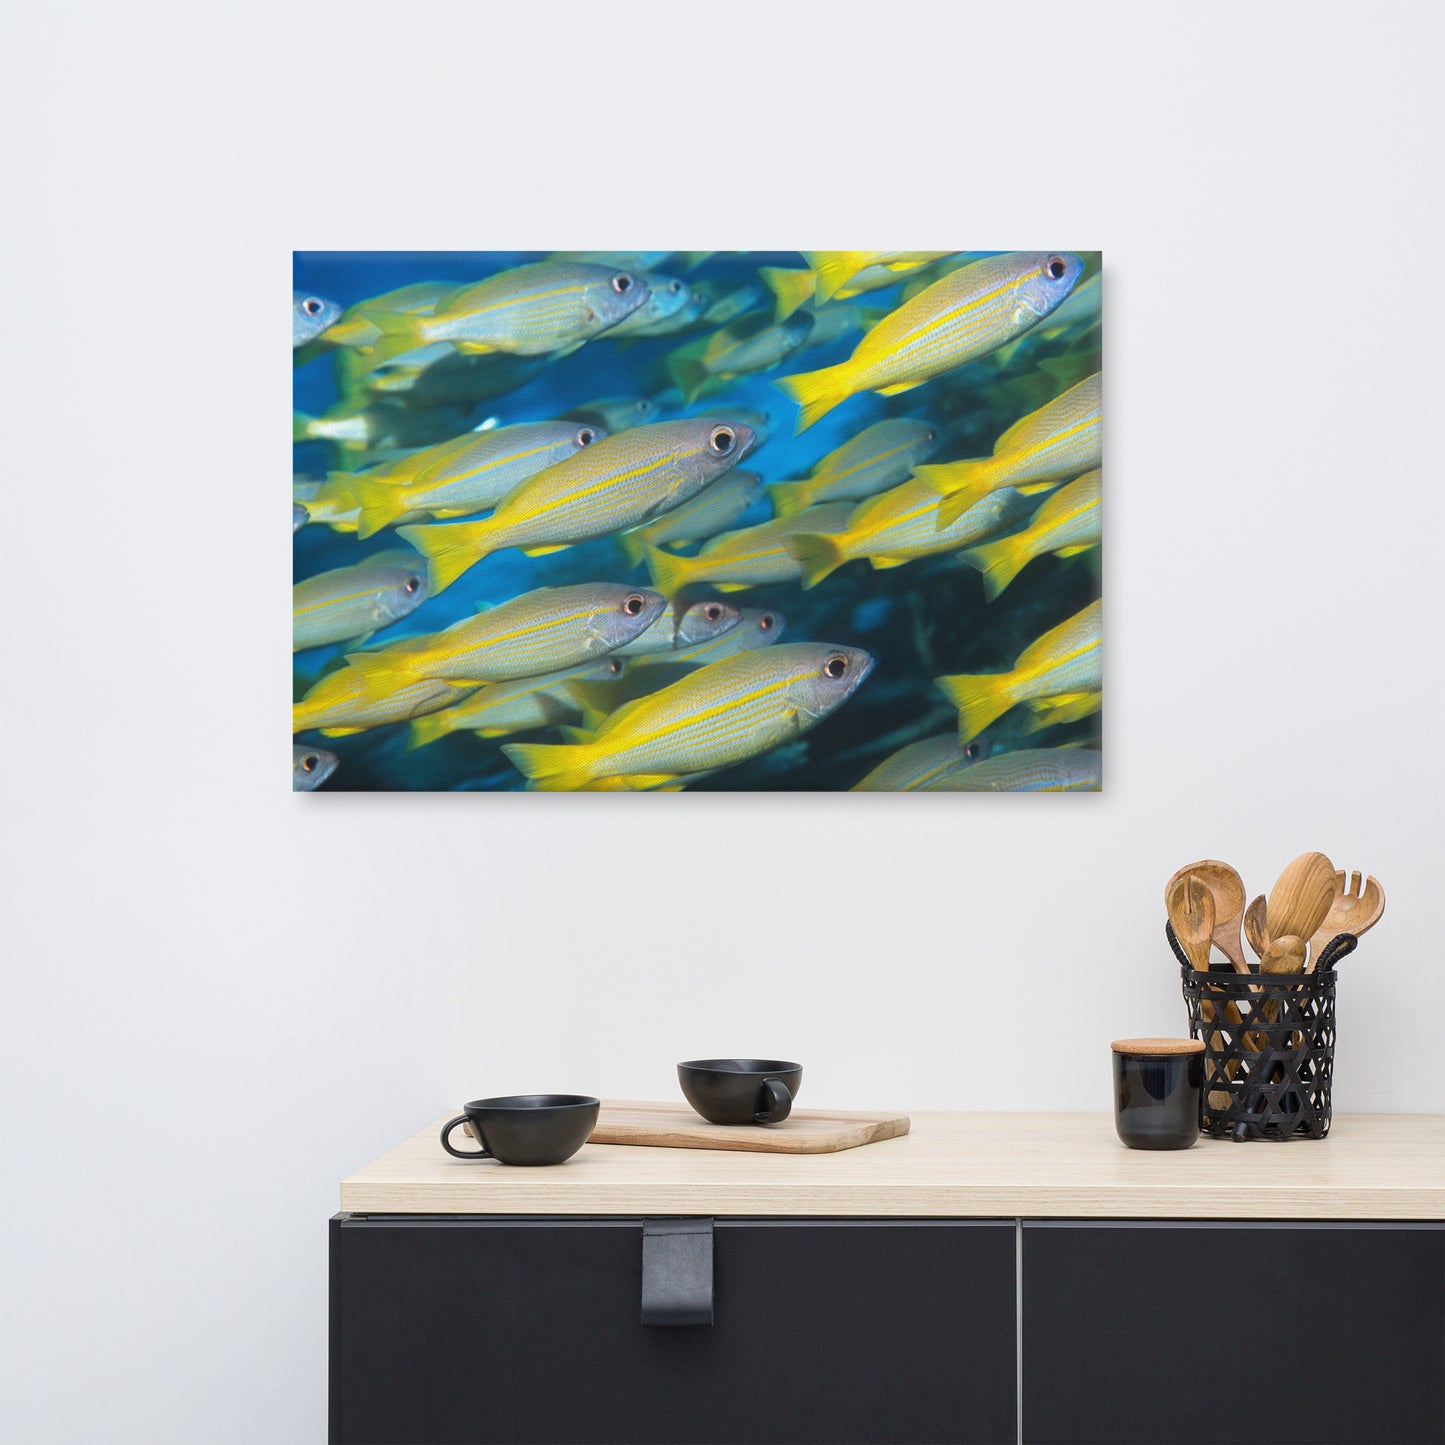 School of Yellow Tropical Fish in Blue Ocean Water Animal Wildlife Photograph Canvas Wall Art Print